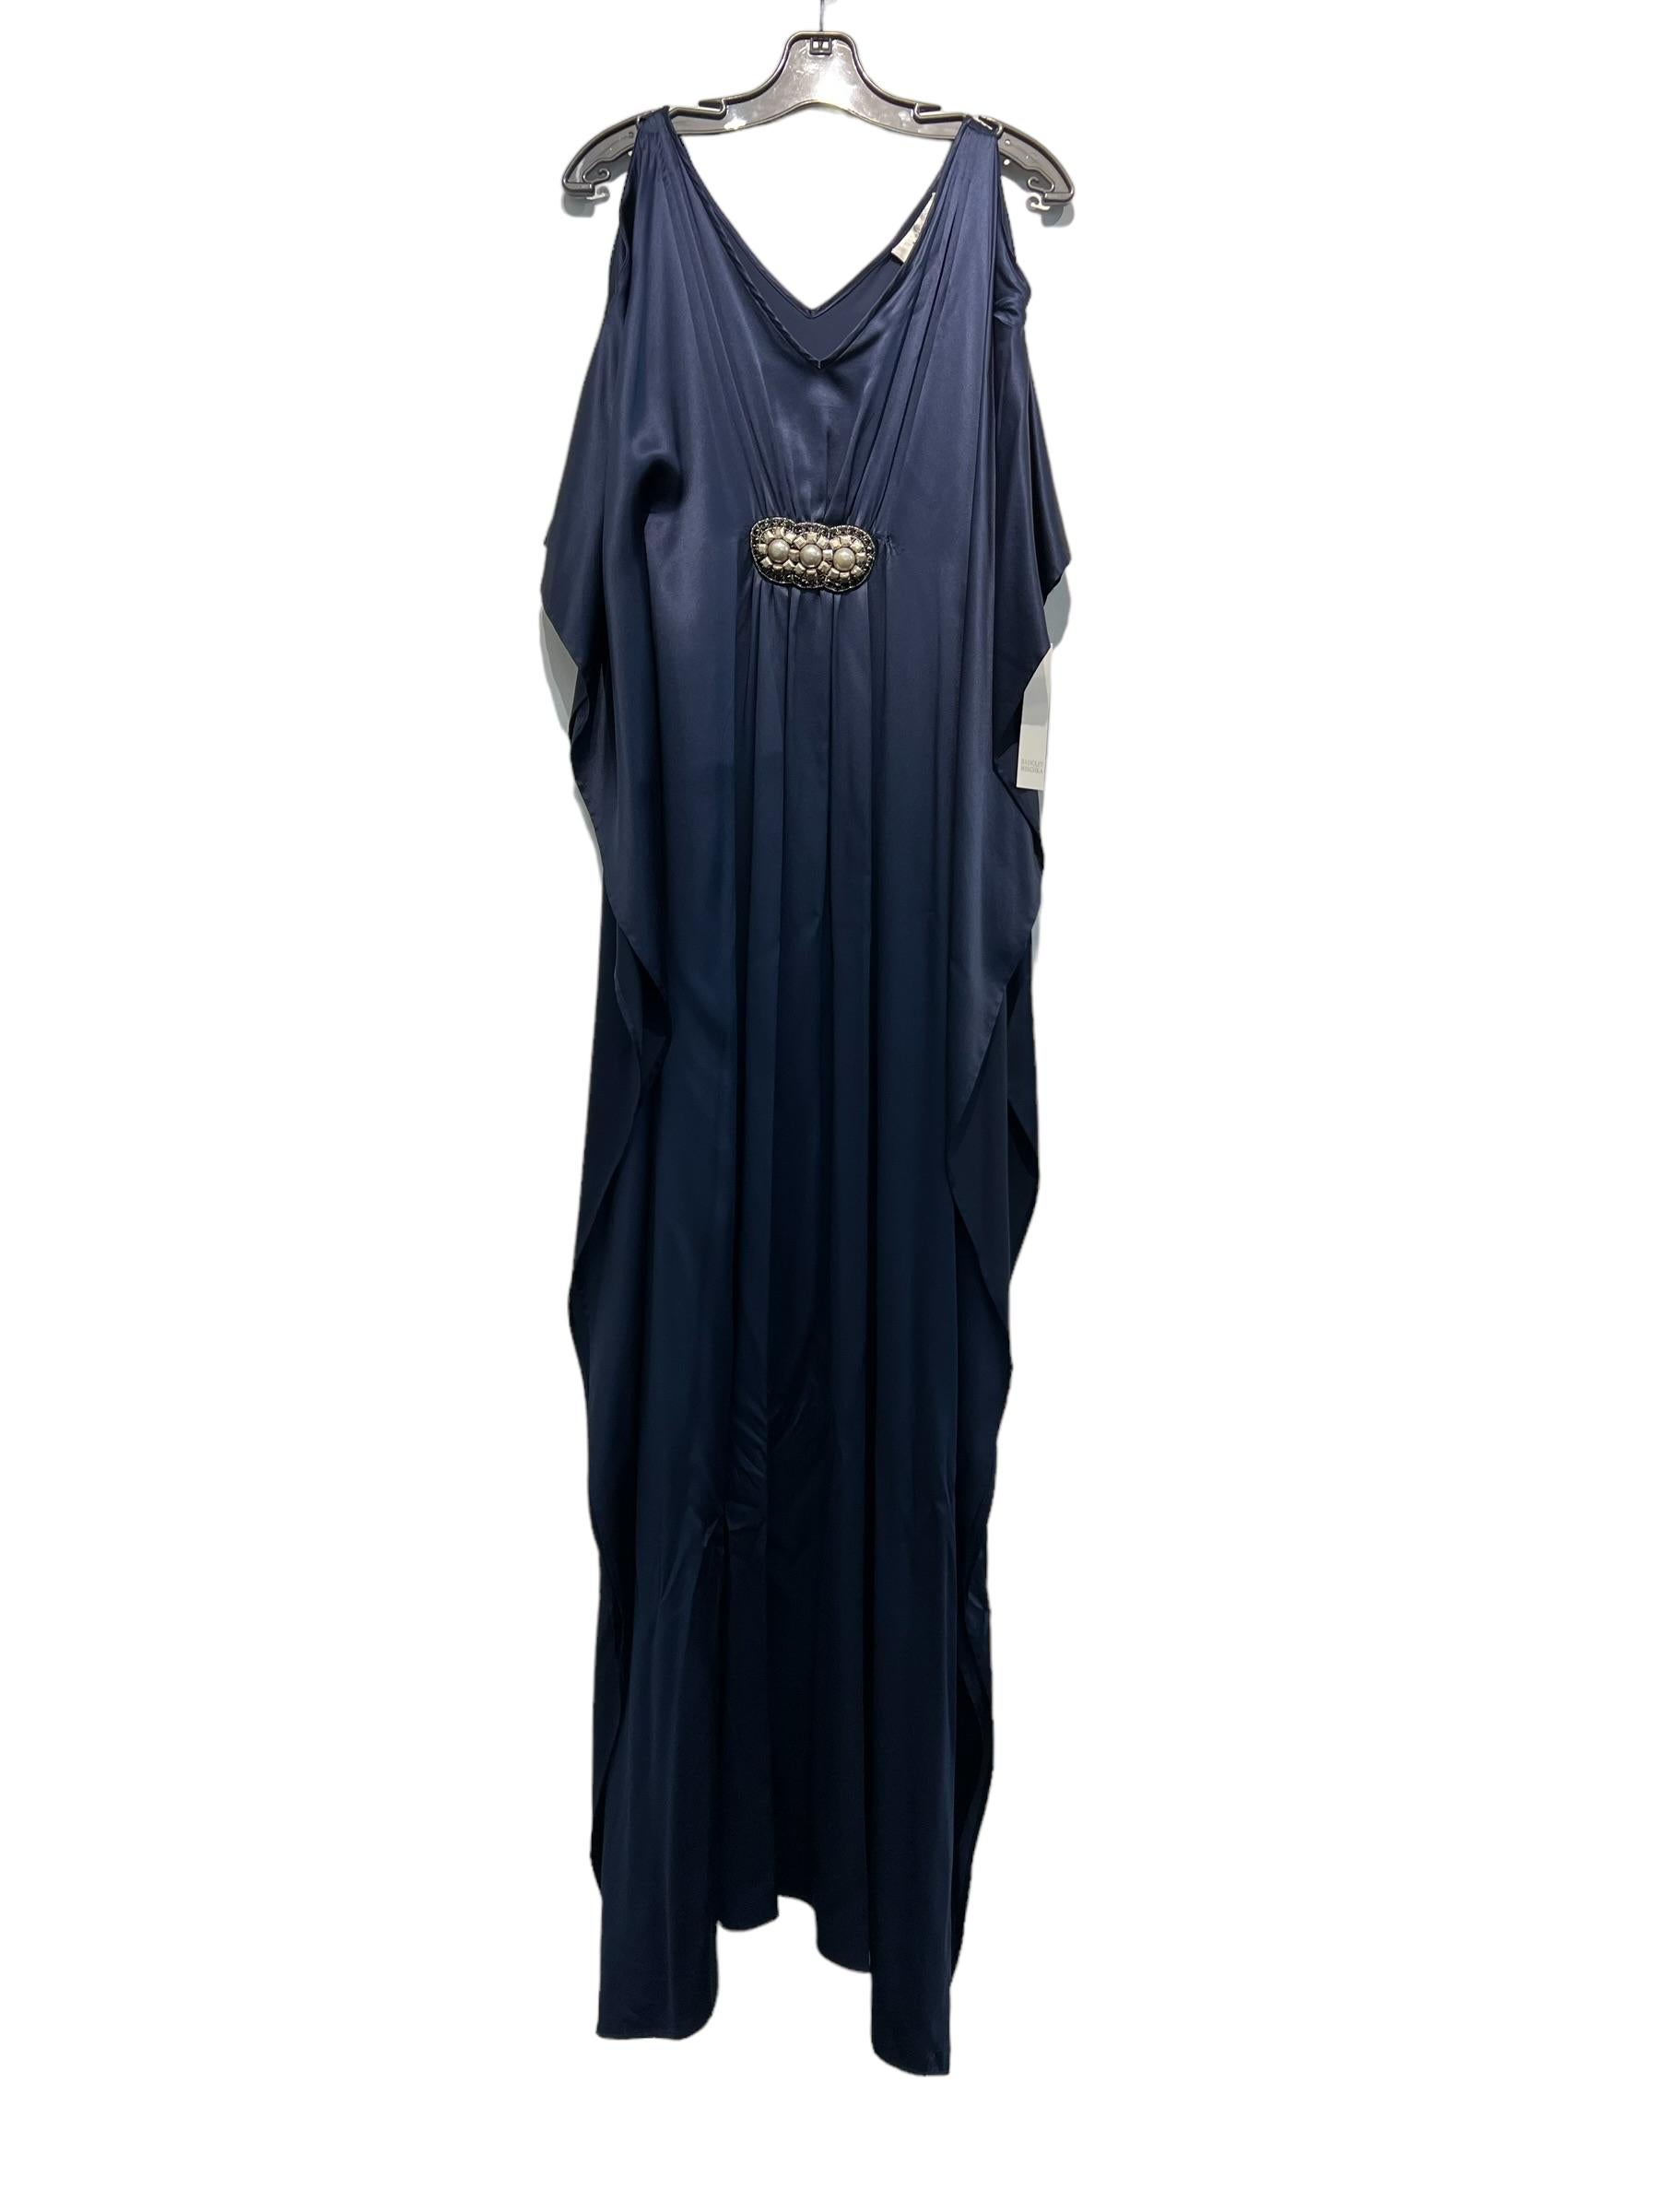 With its Impeccable fit, silk fabric, and eye-catching design, this navy kimono is the perfect choice for any fashion-forward woman looking to make a statement. This stunning Badgley Mischka offers a look that is both chic and versatile, allowing